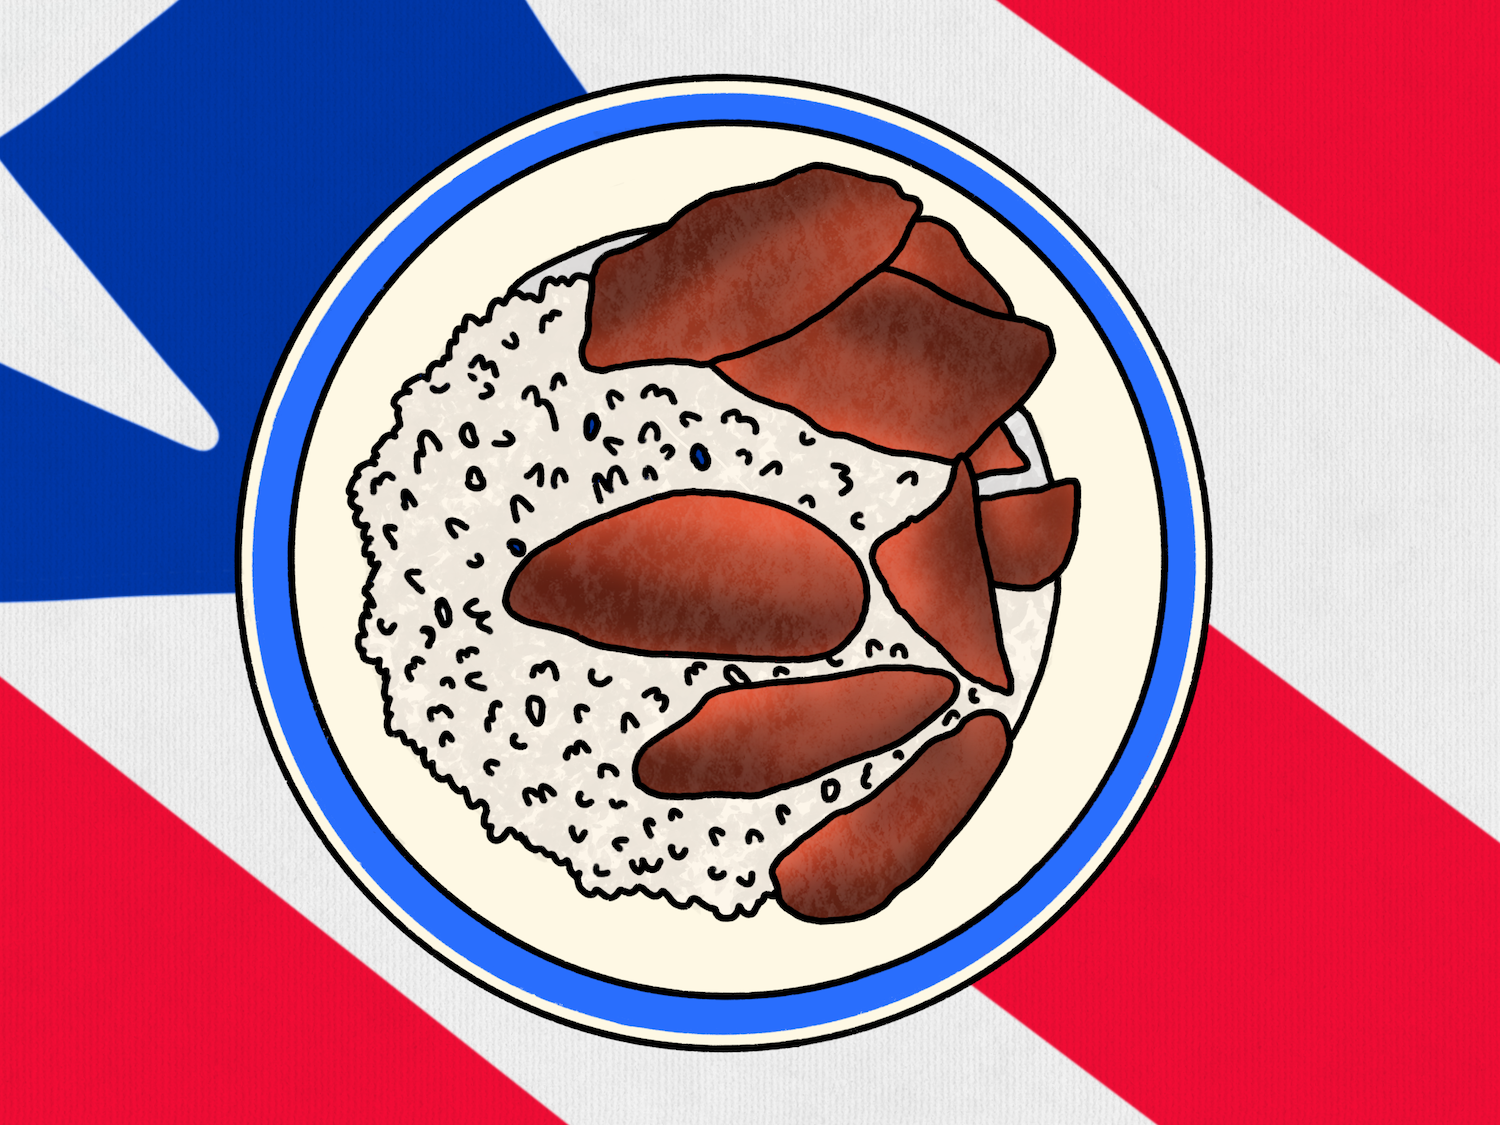 An illustration of a plate of arroz con chuletas with the Puerto Rican flag as the background.